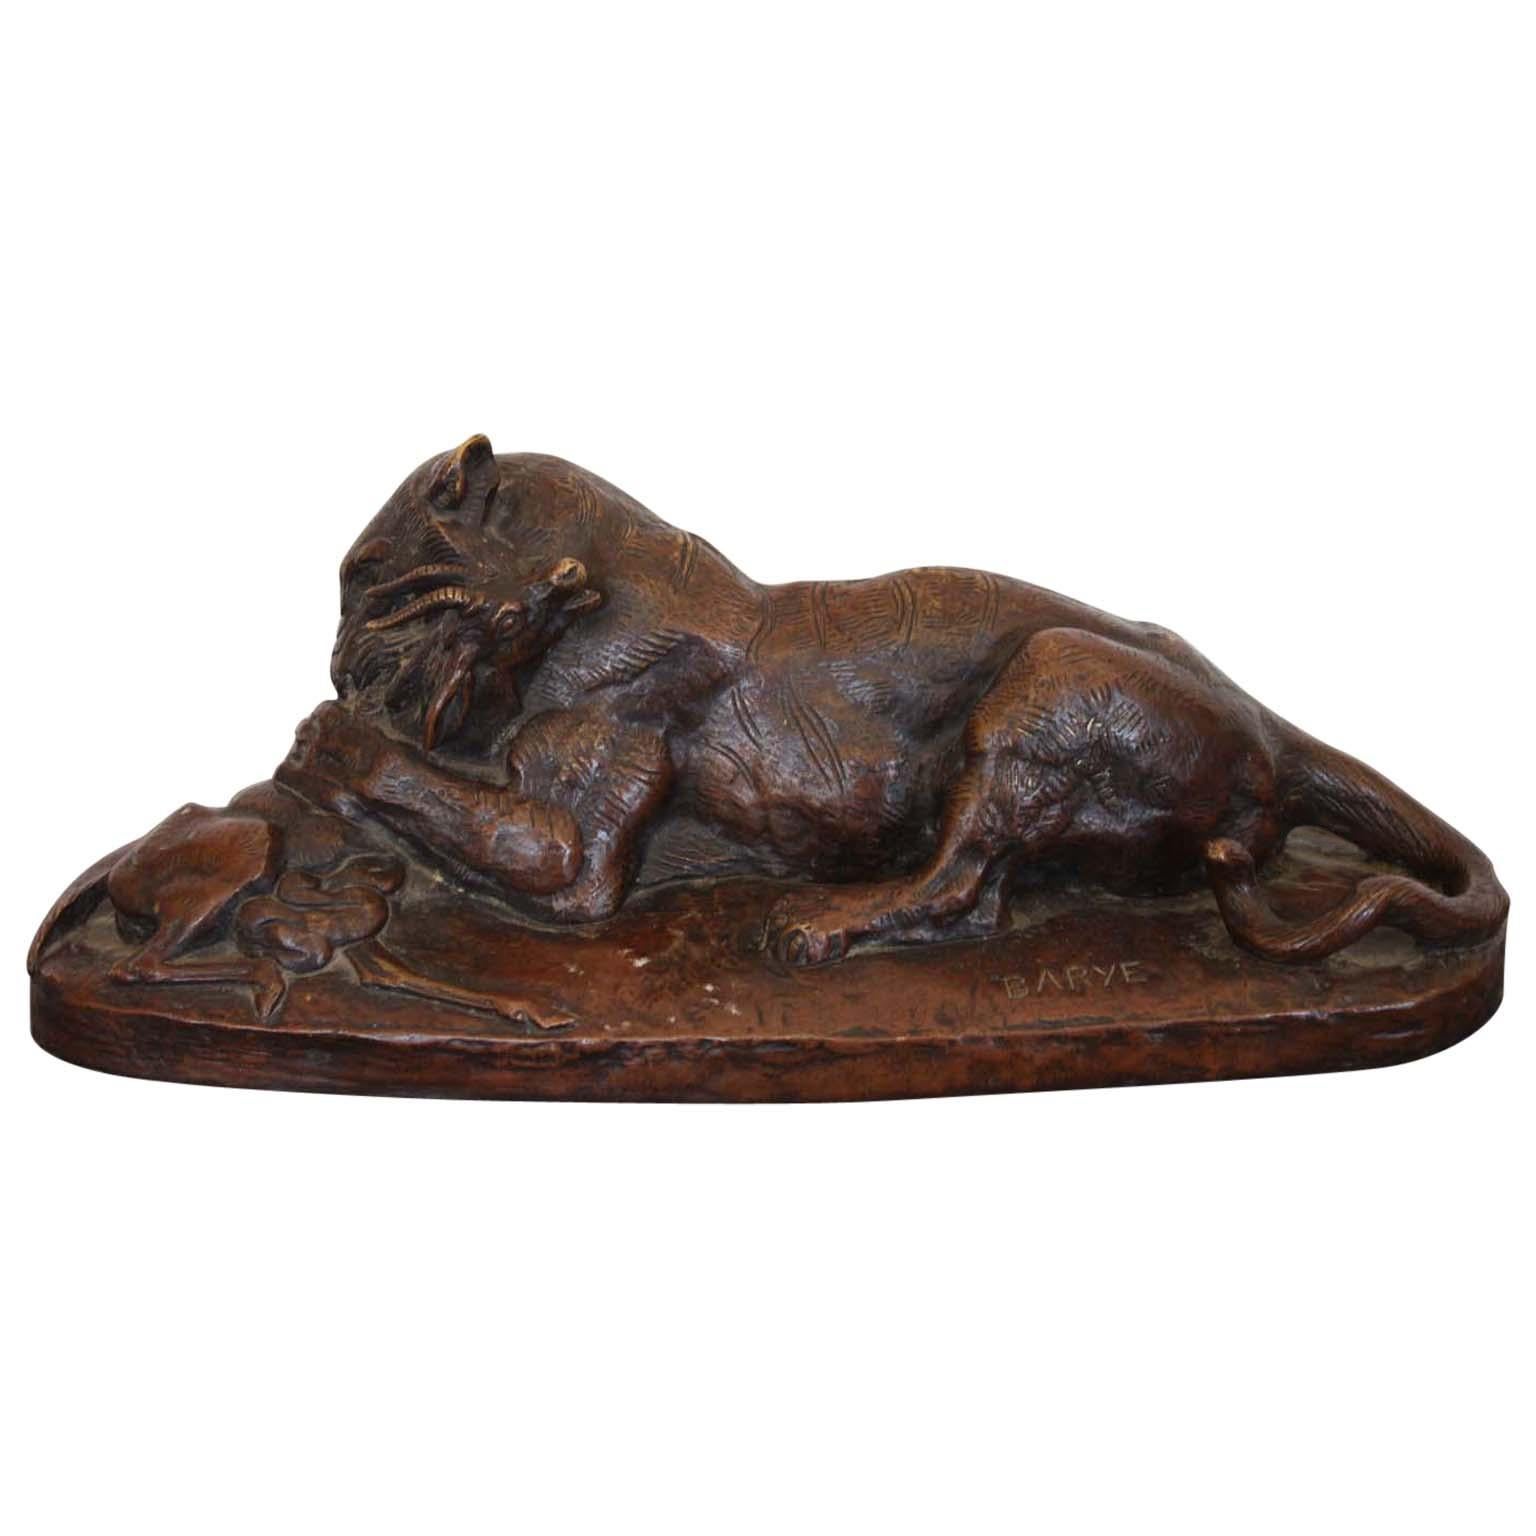 Bronze Sculpture by Barye "Lion Eating Antelope" Signed 19th Century For Sale